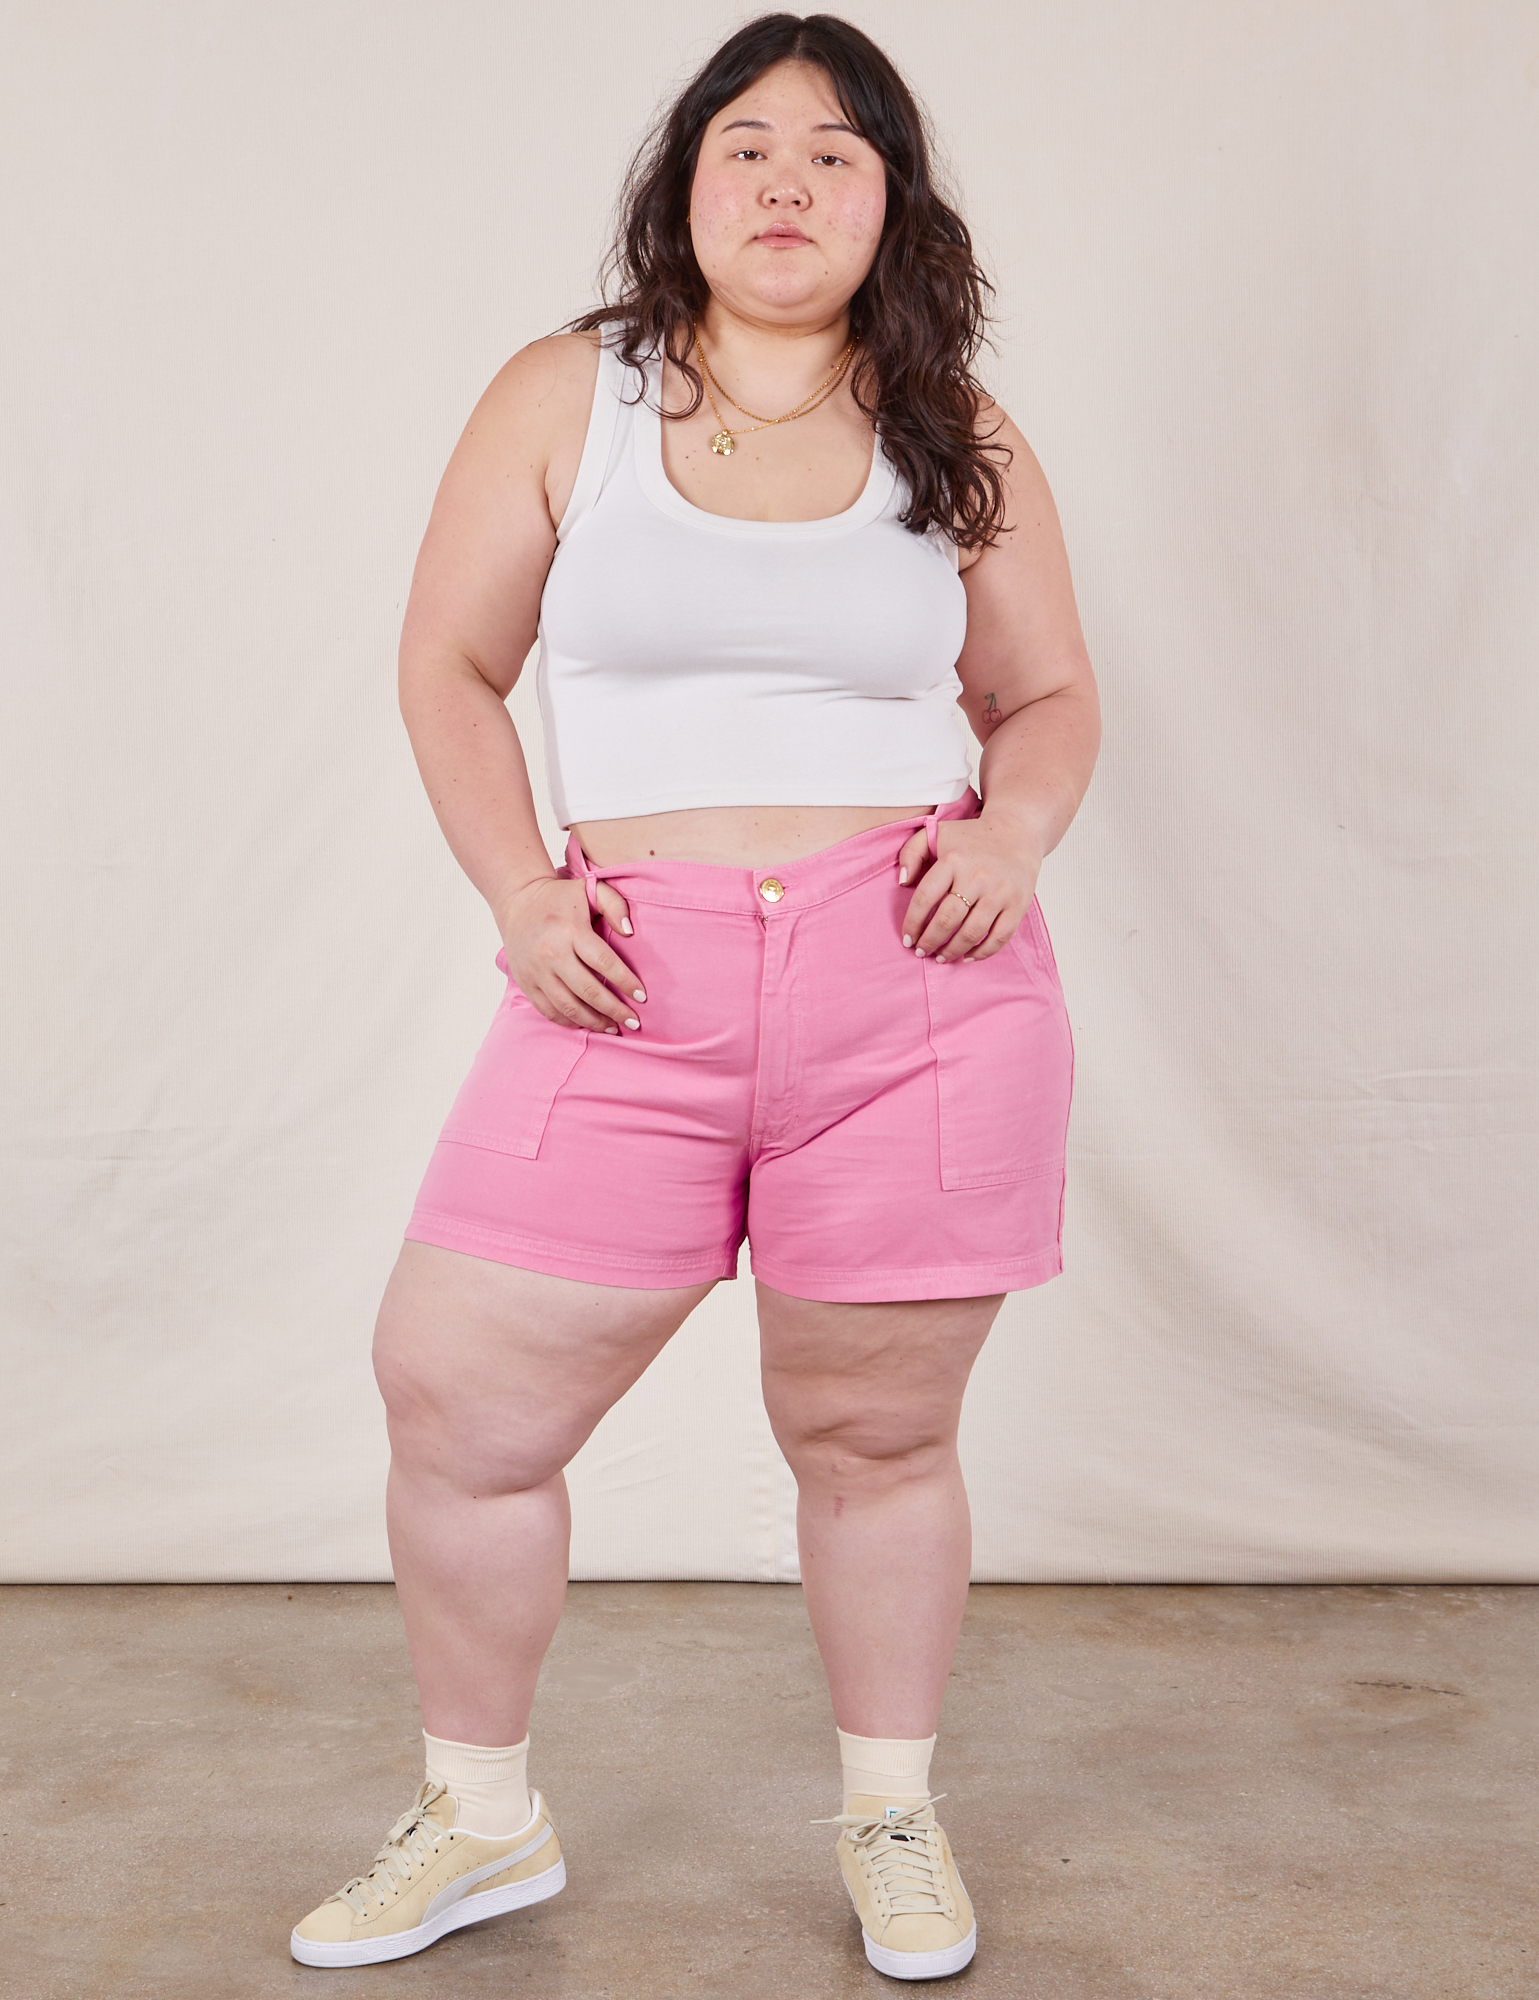 Ashley is 5’7” and wearing 1XL Classic Work Shorts in Bubblegum Pink paired with Cropped Tank Top in vintage tee off-white